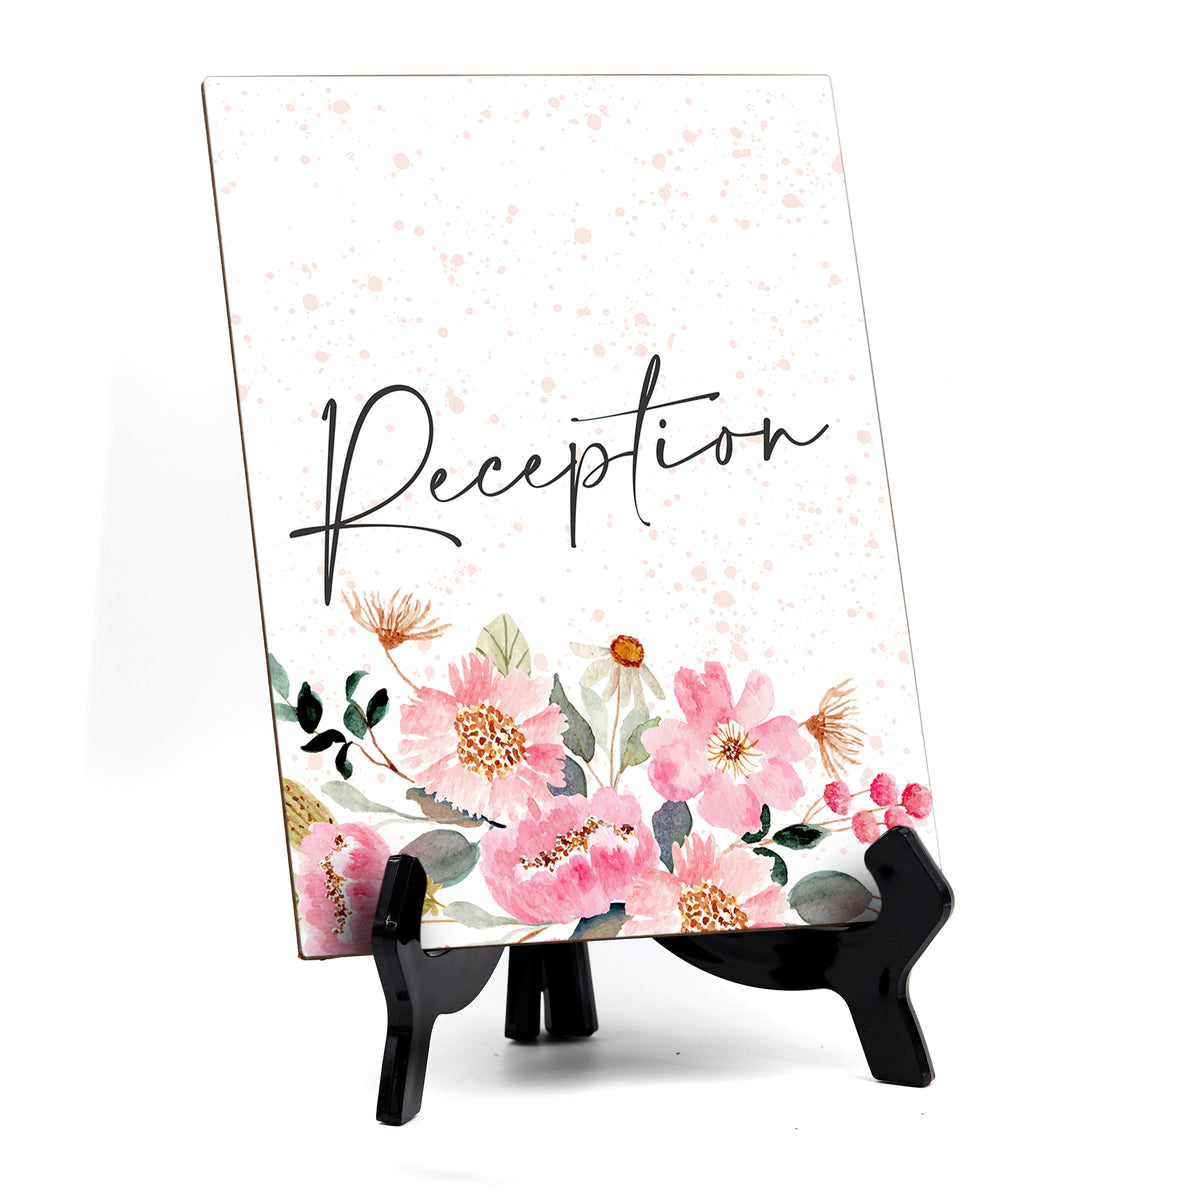 Reception Table Sign with Easel, Floral Watercolor Design (6" x 8")